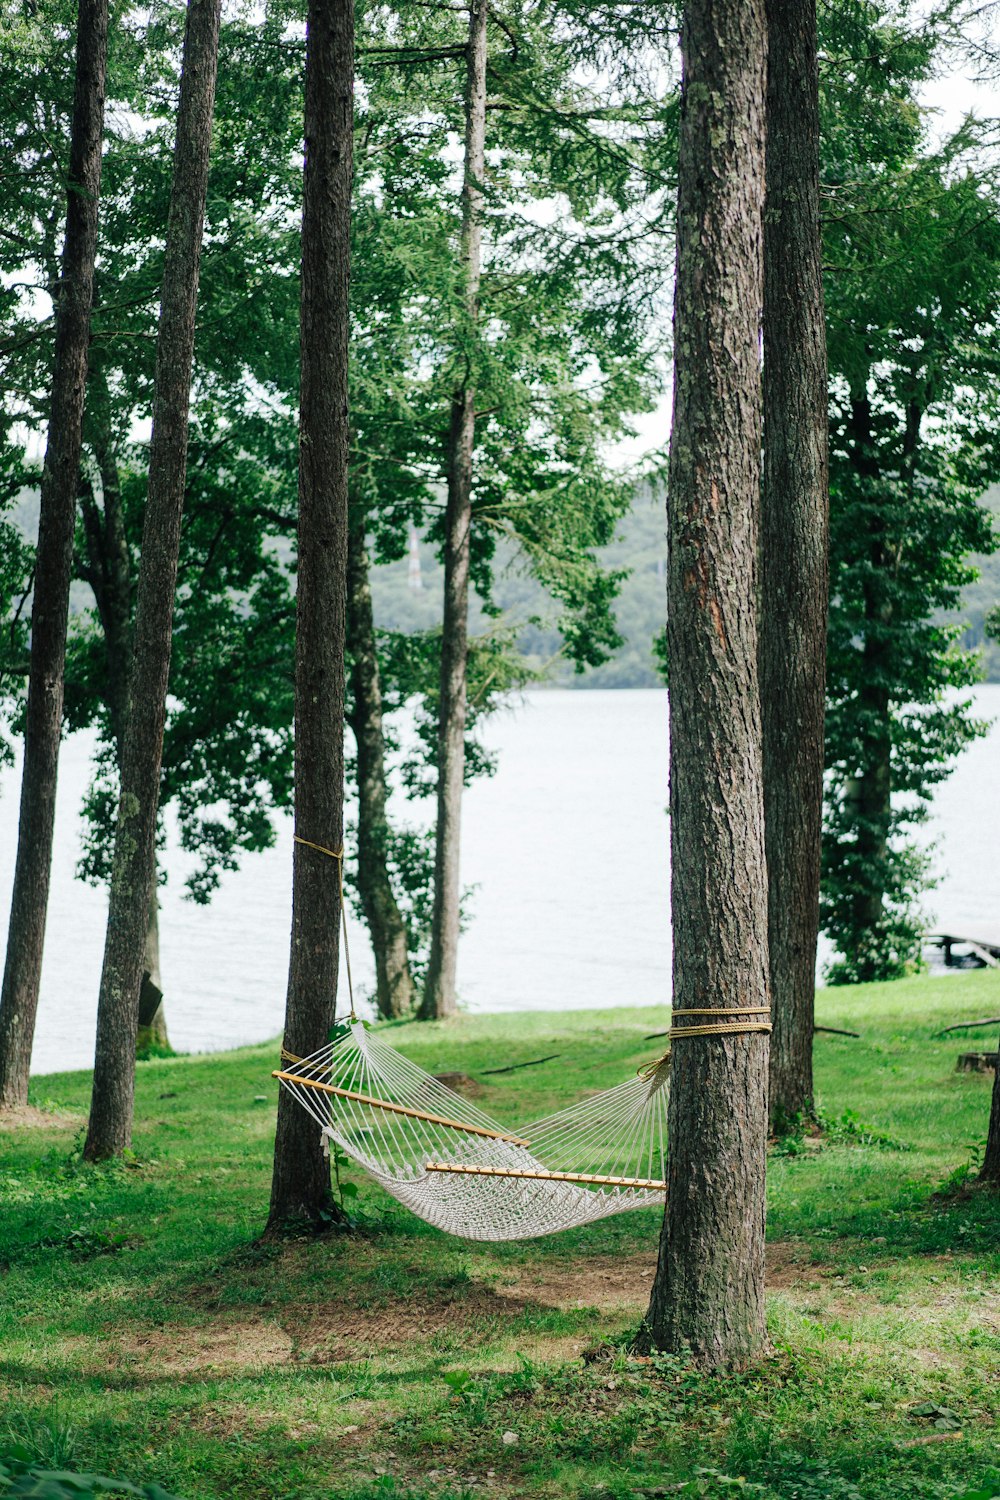 green hammock tied on tree trunk near body of water during daytime